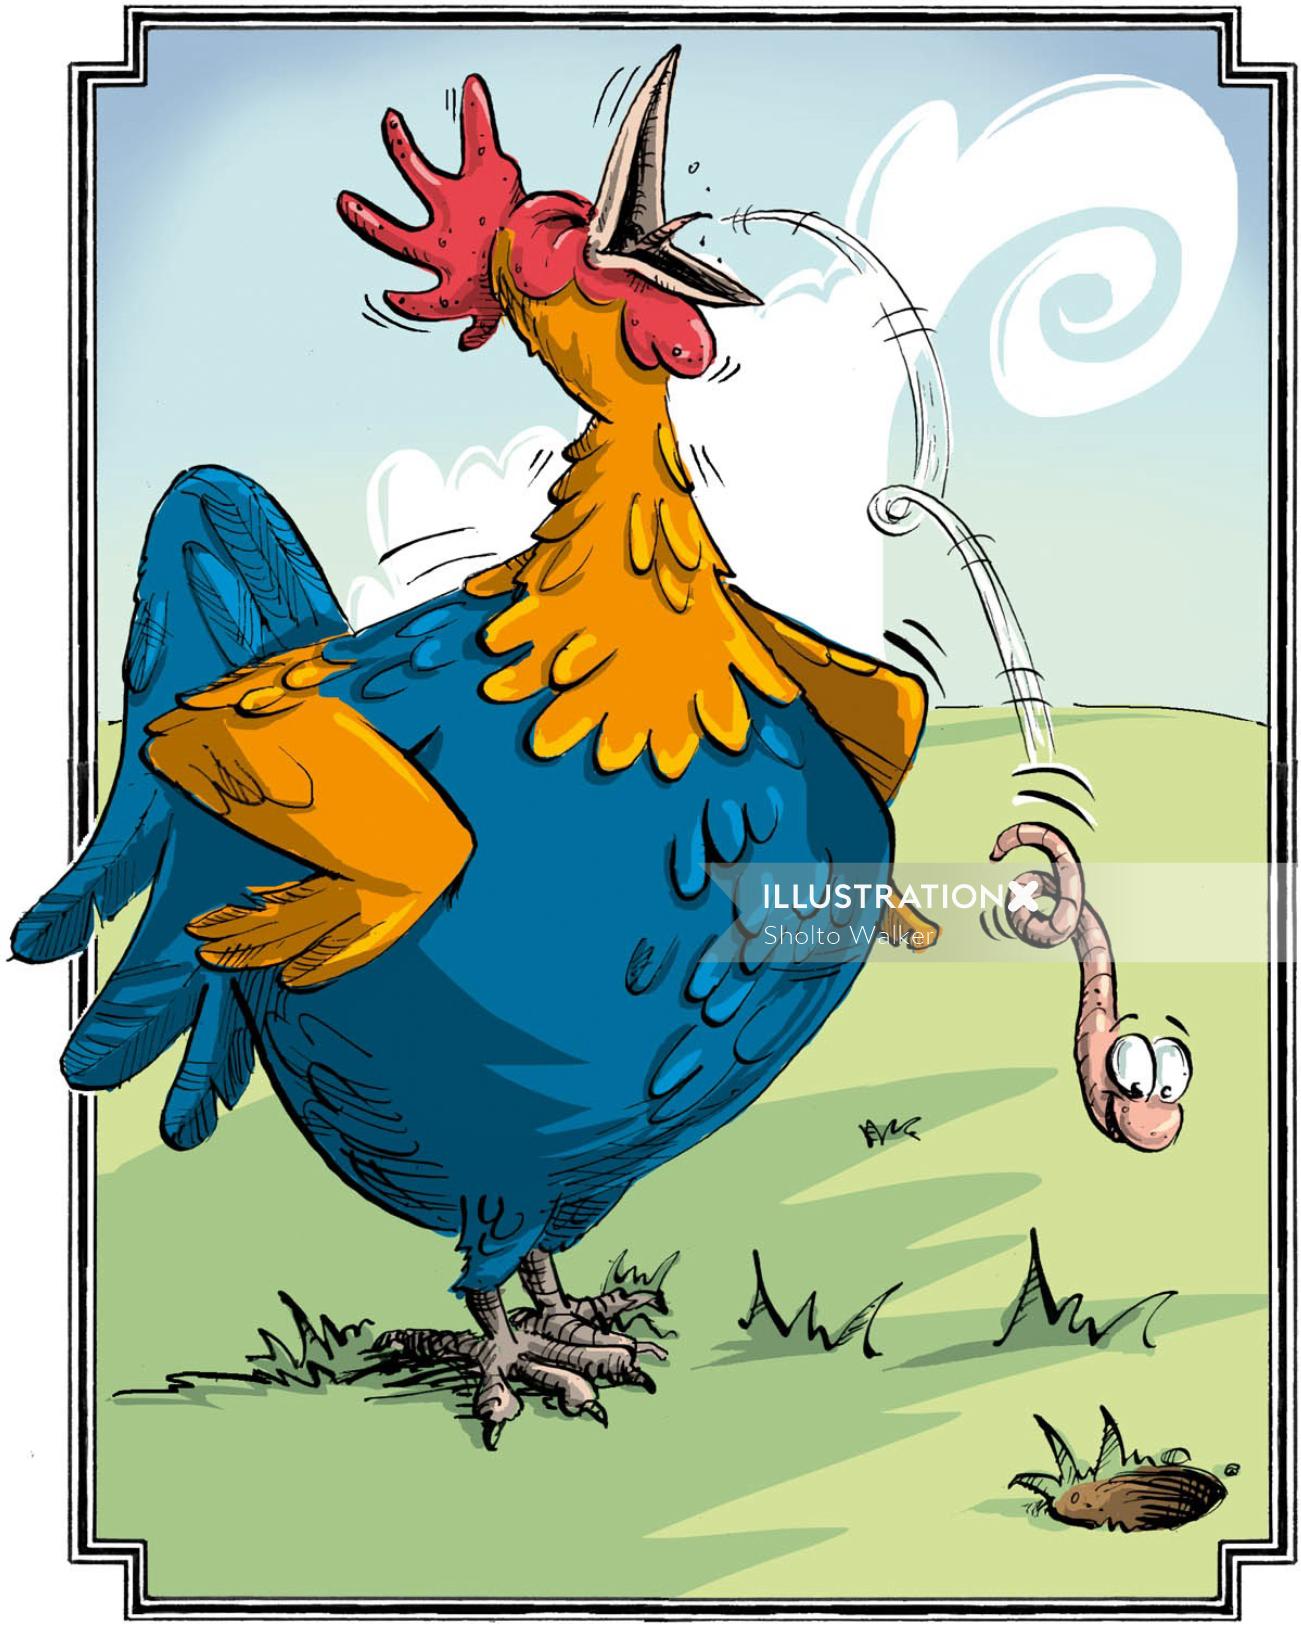 Rooster illustration | Humour style gallery